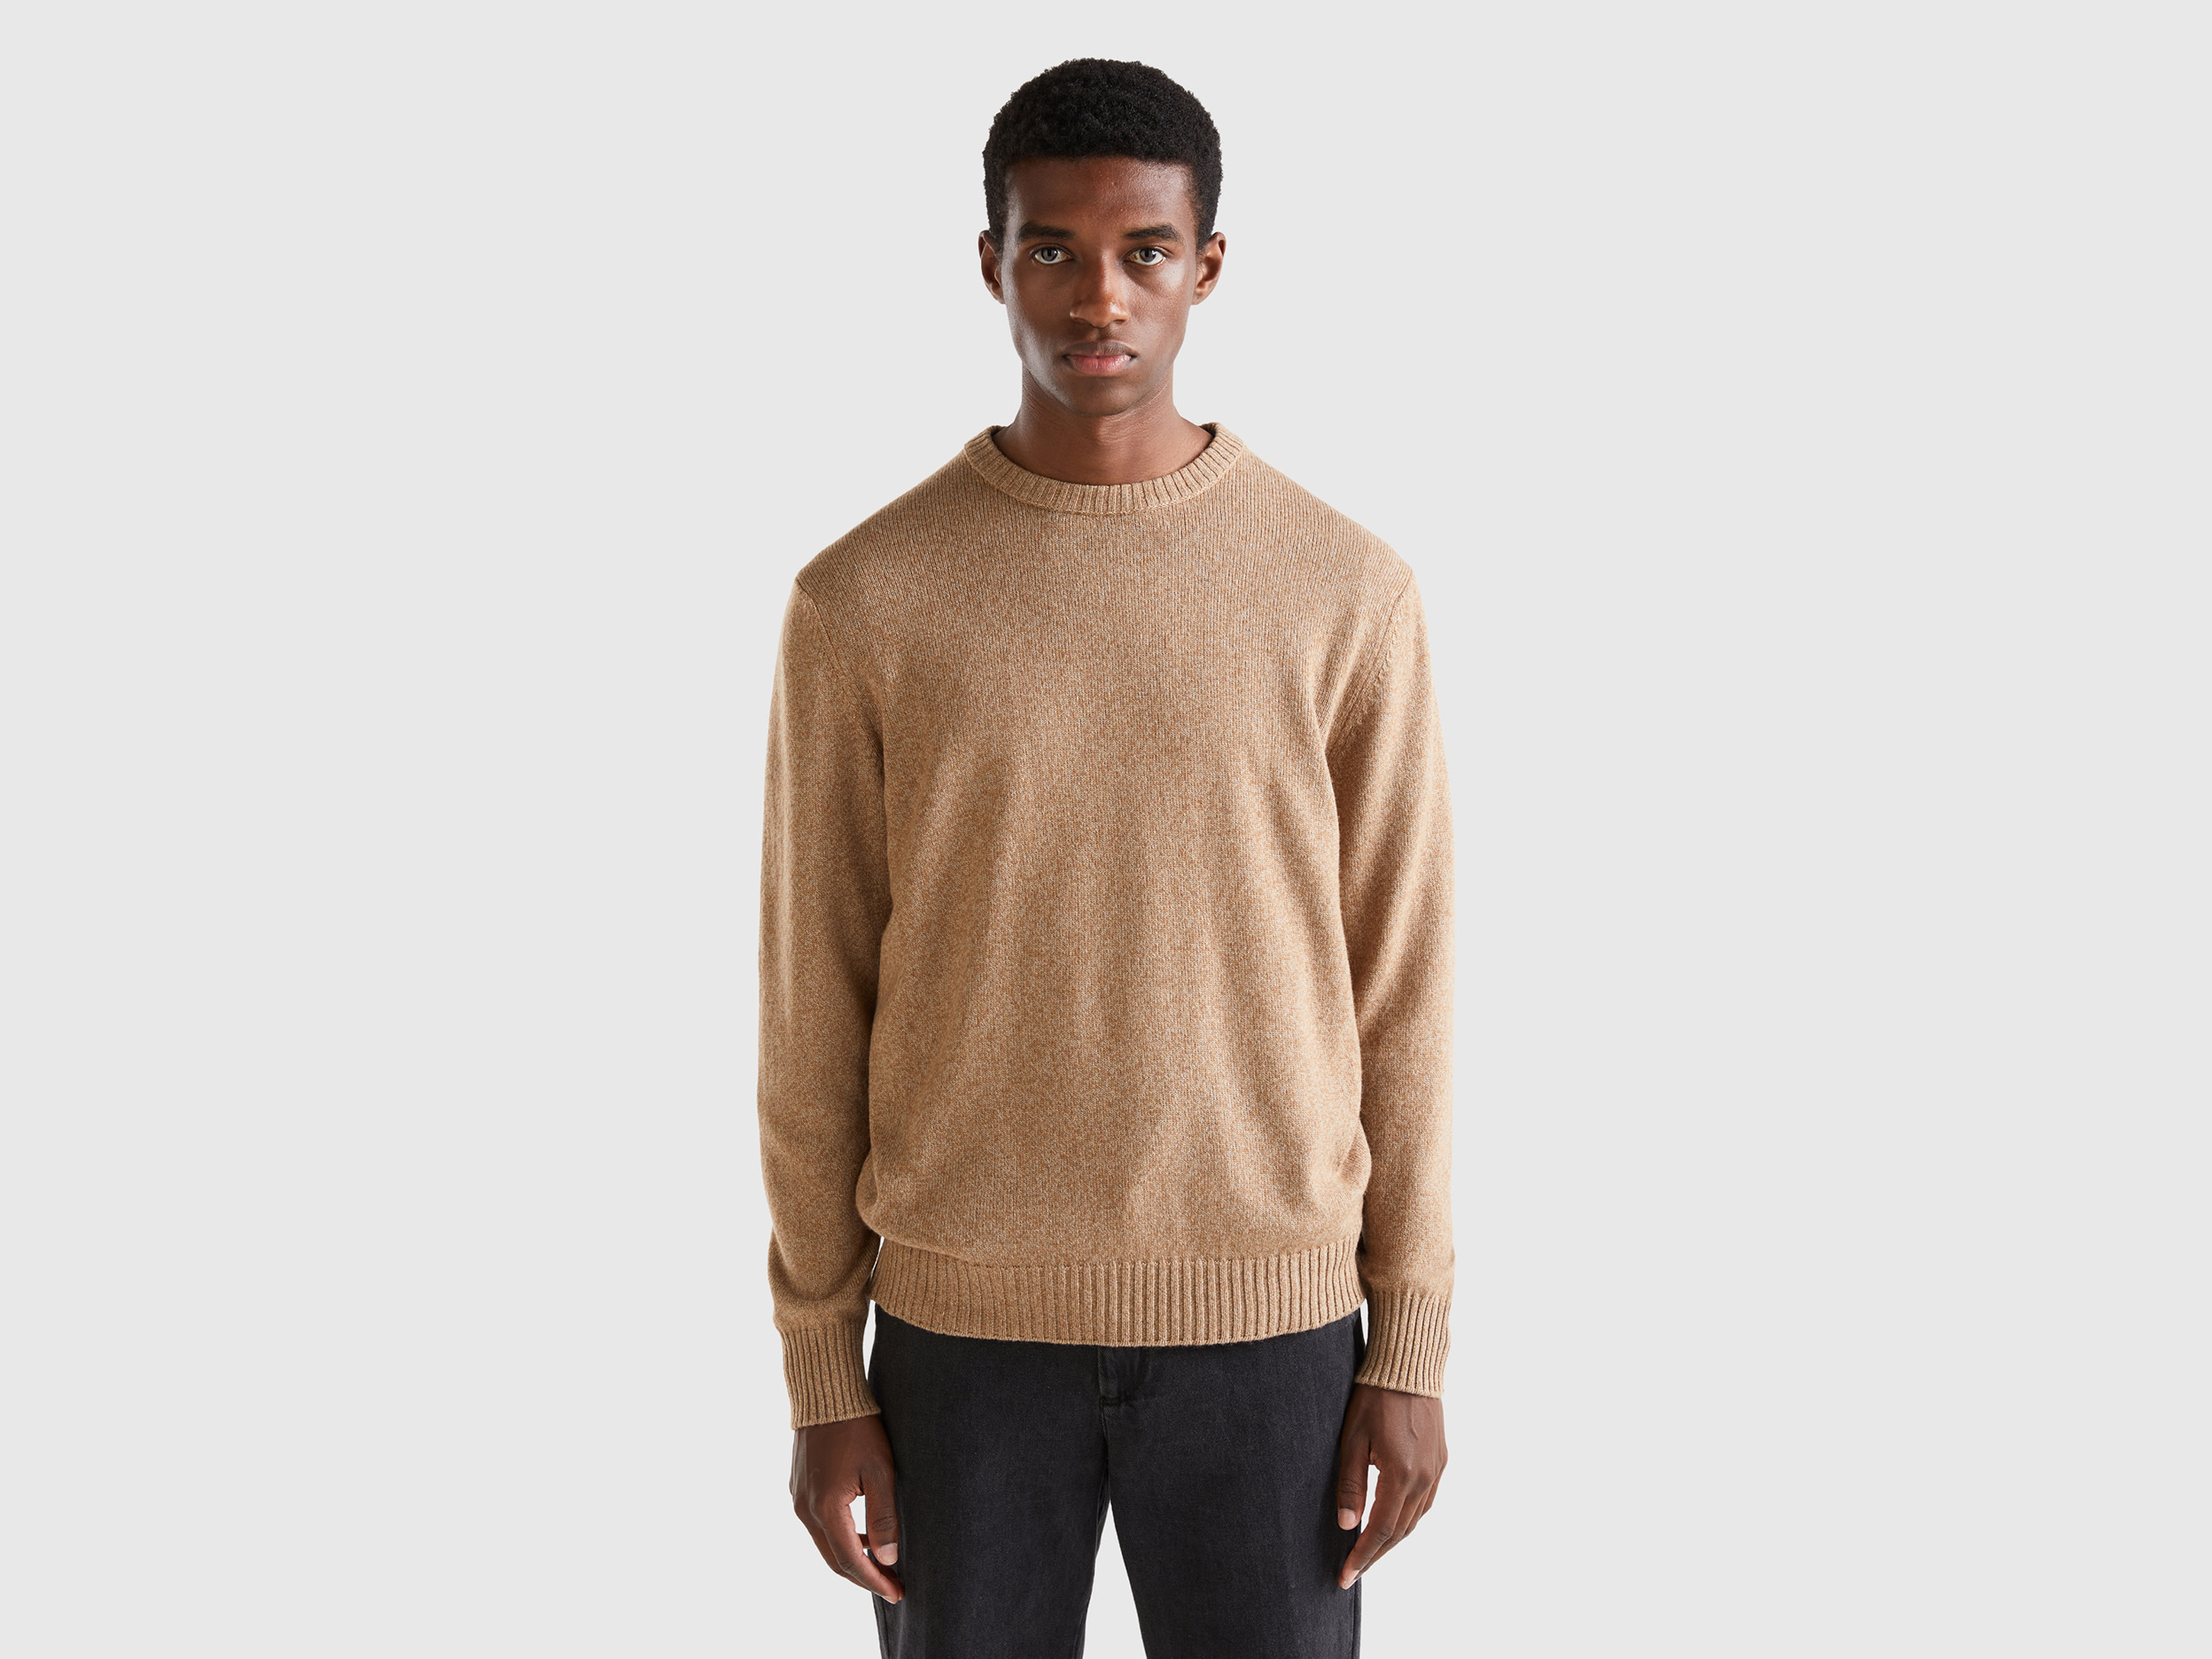 Benetton, Crew Neck Sweater In Cashmere And Wool Blend, size XS, Beige, Men